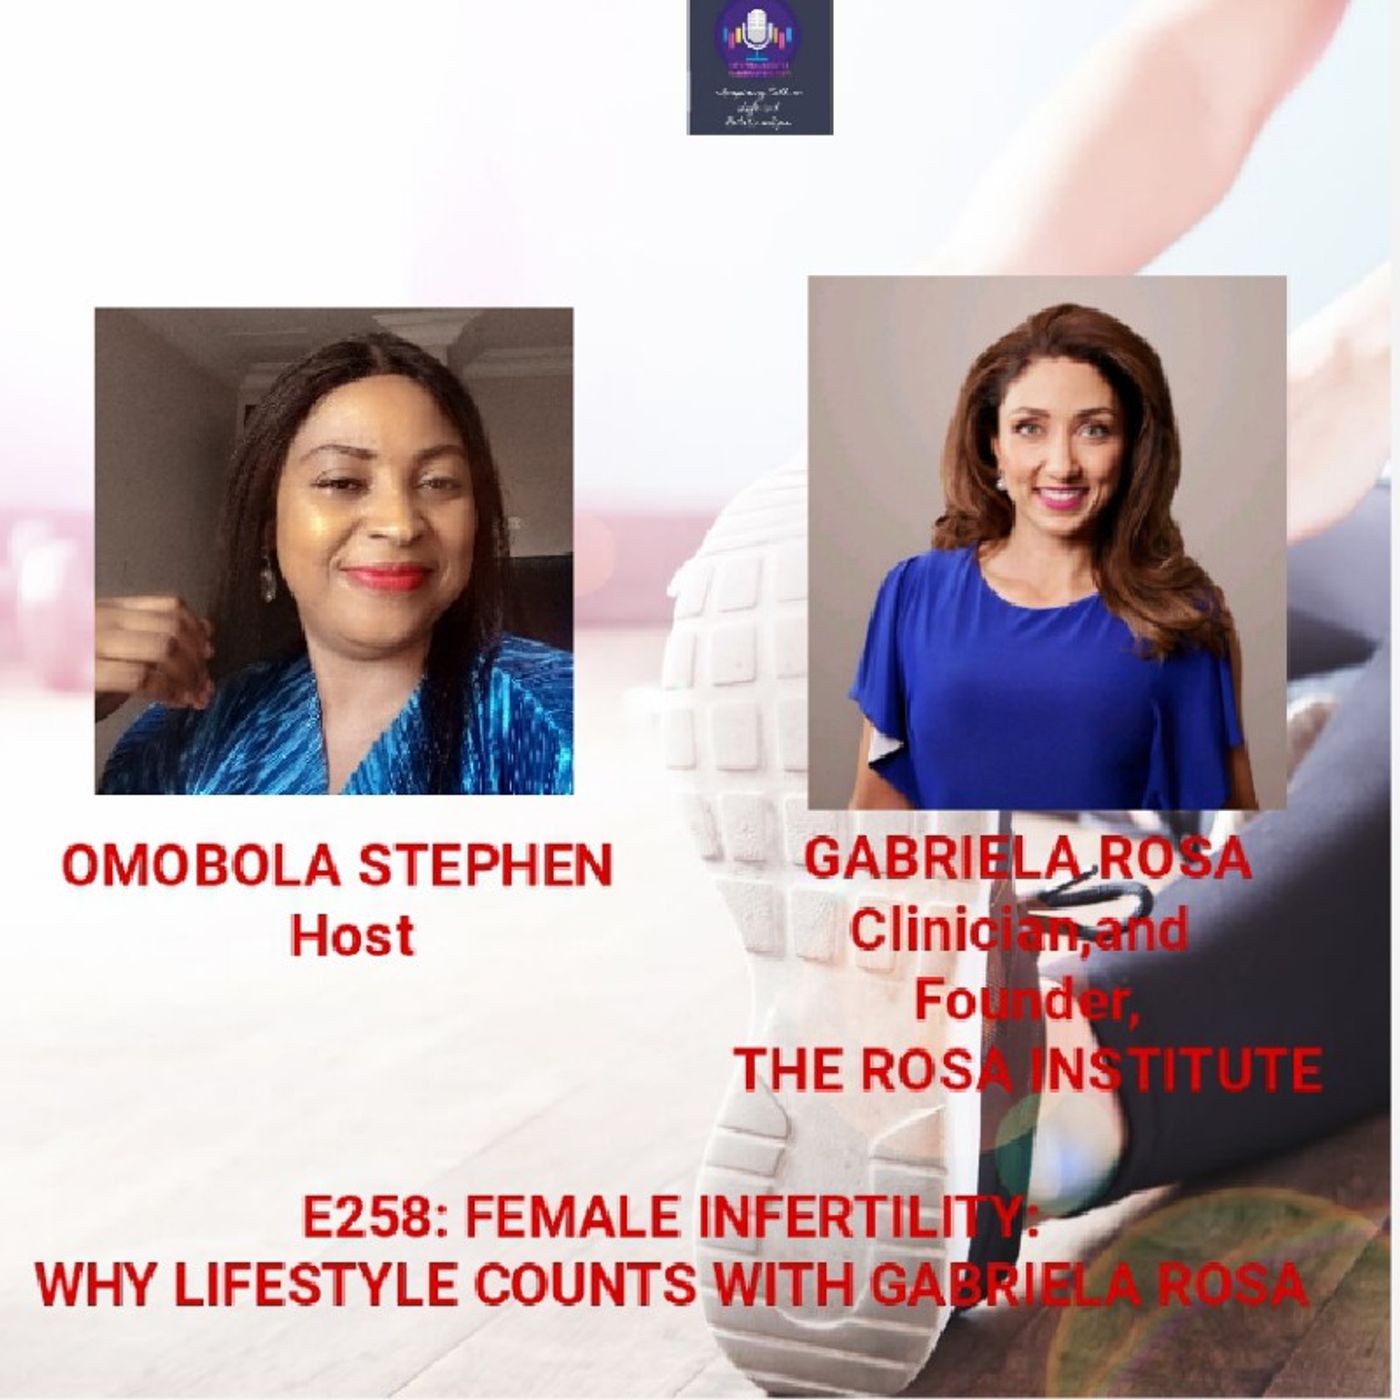 E258: Female Infertility: Why Lifestyle Counts With Gabriela Rosa